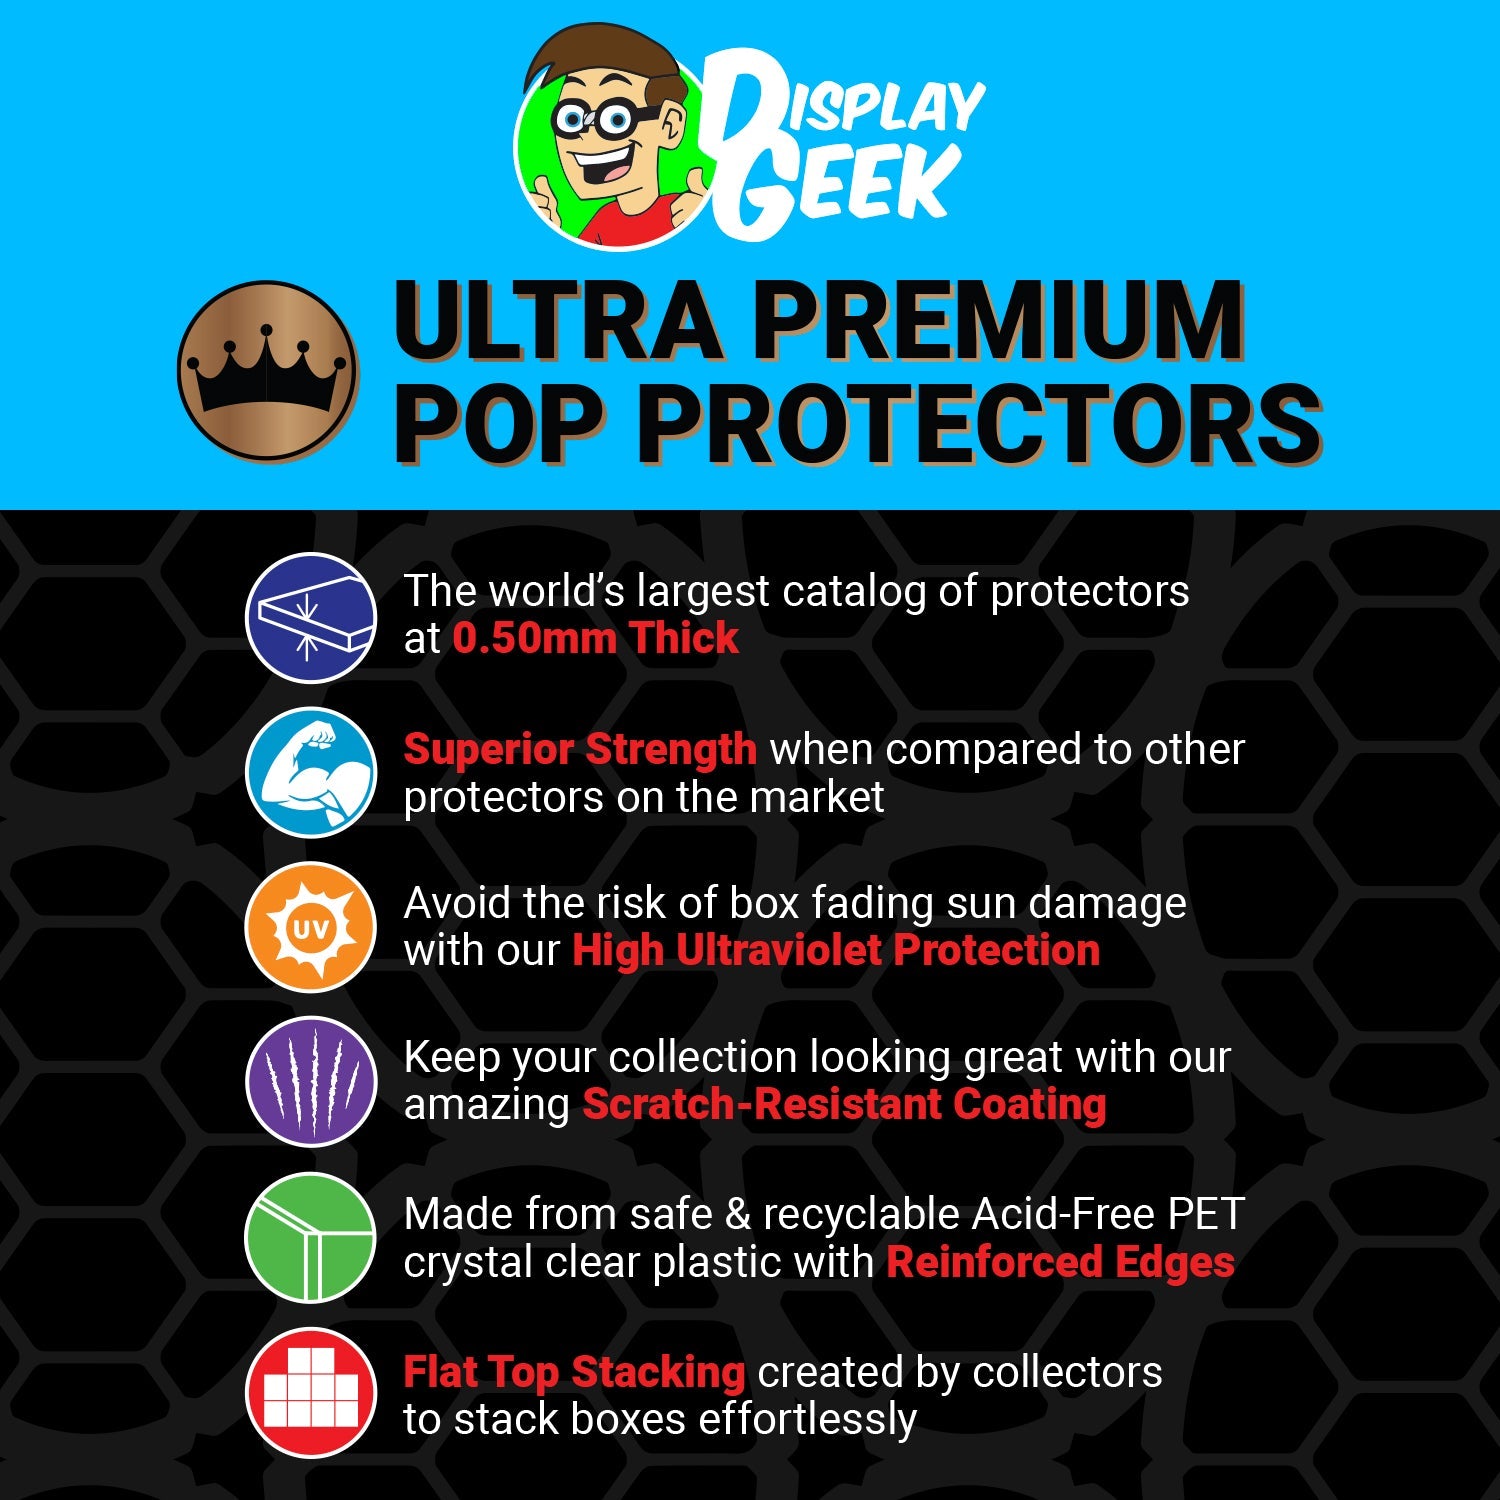 Pop Protector for Go-Go's #50 Funko Pop Albums - PPG Pop Protector Guide Search Created by Display Geek